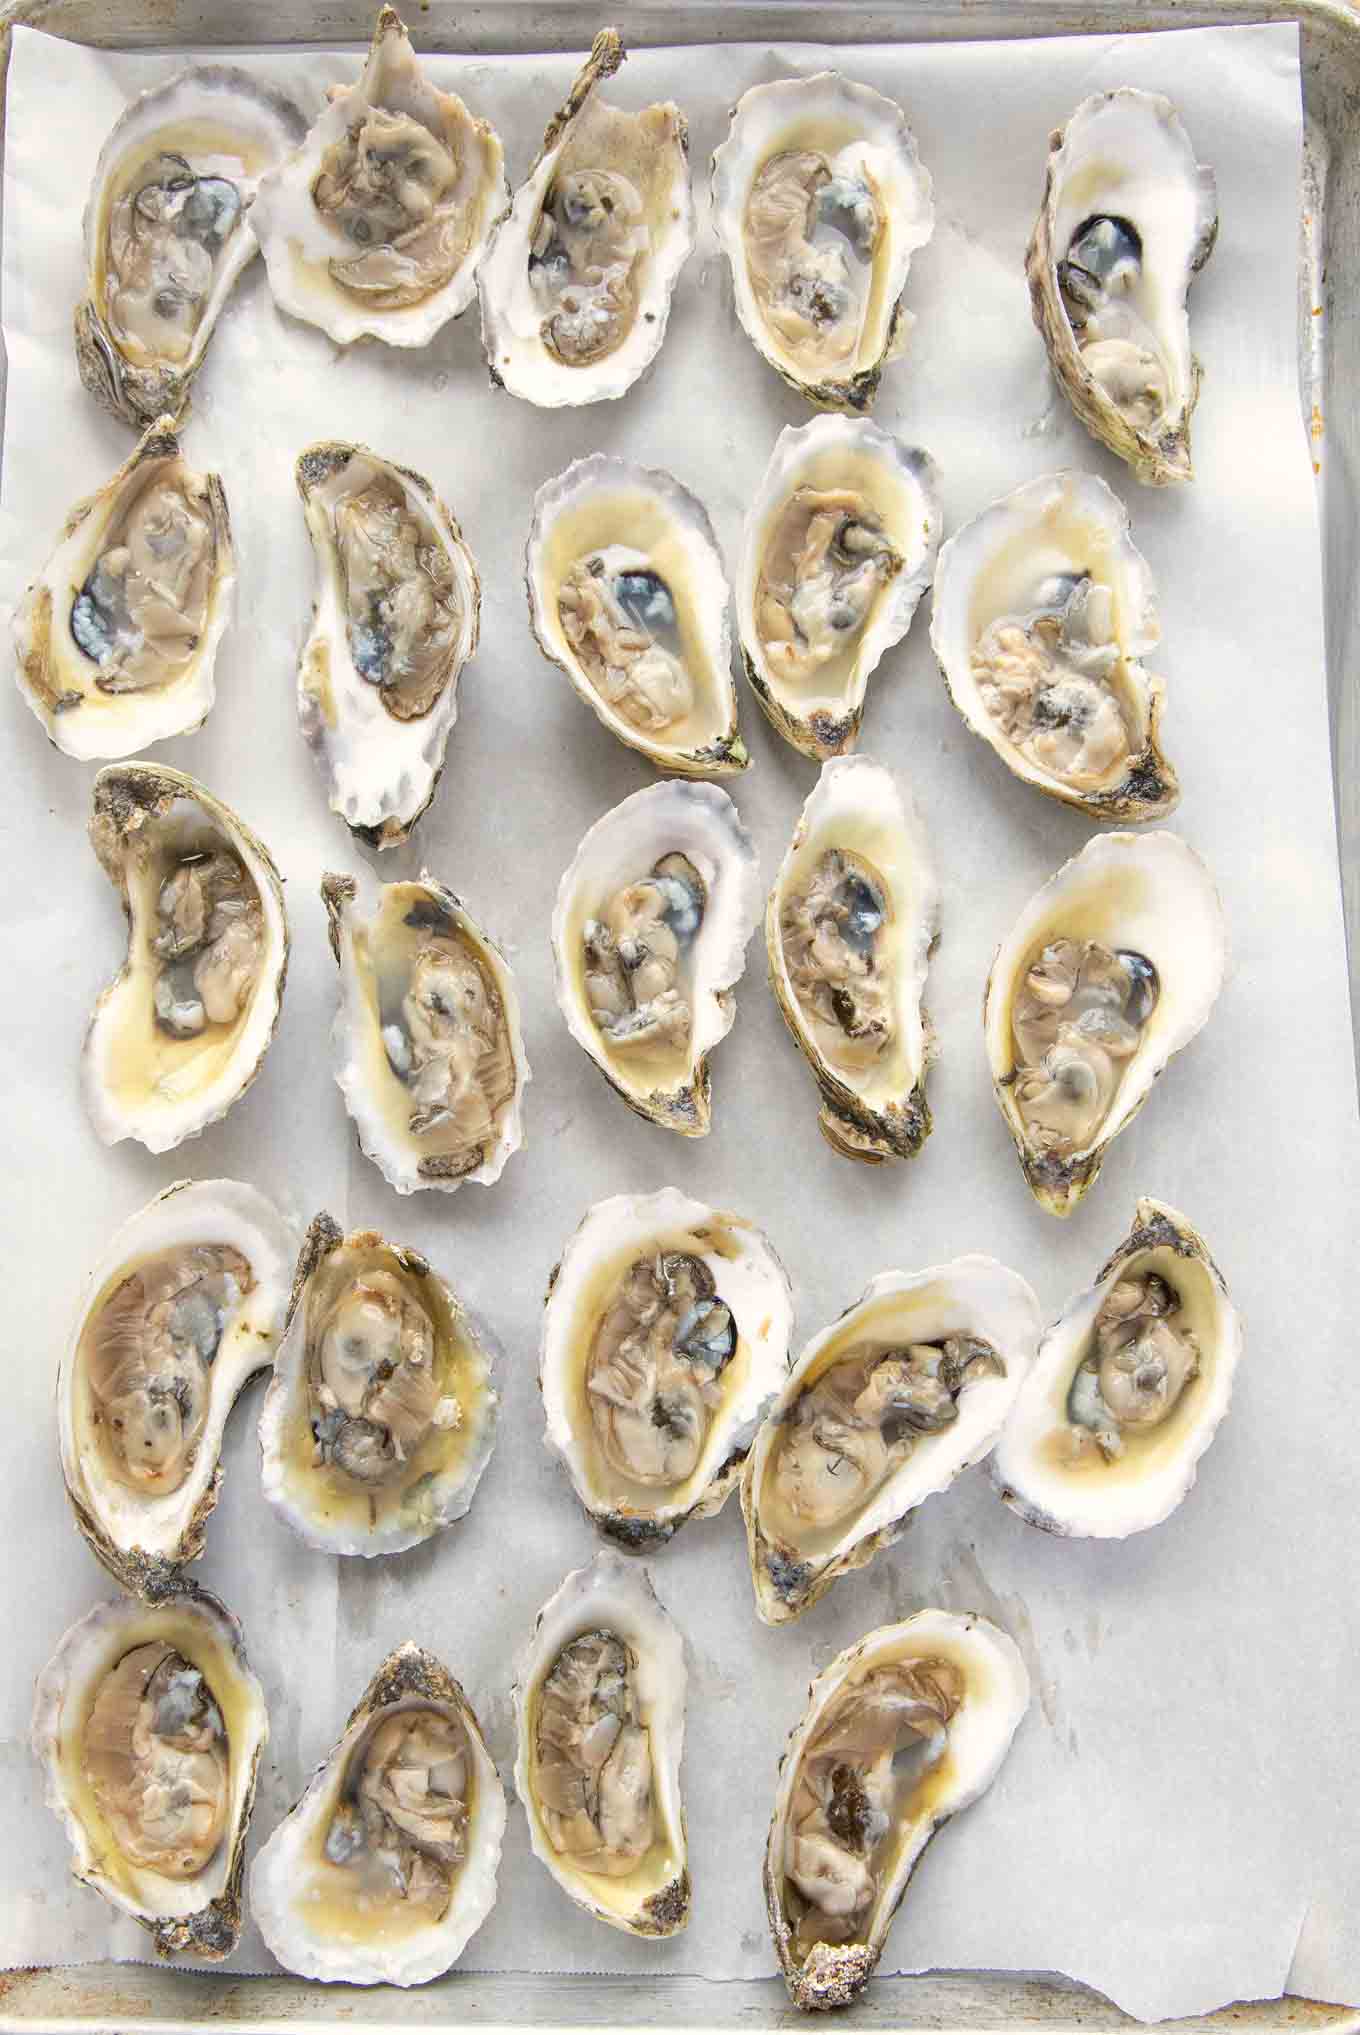 24 oysters open on the half shell on a sheet pan